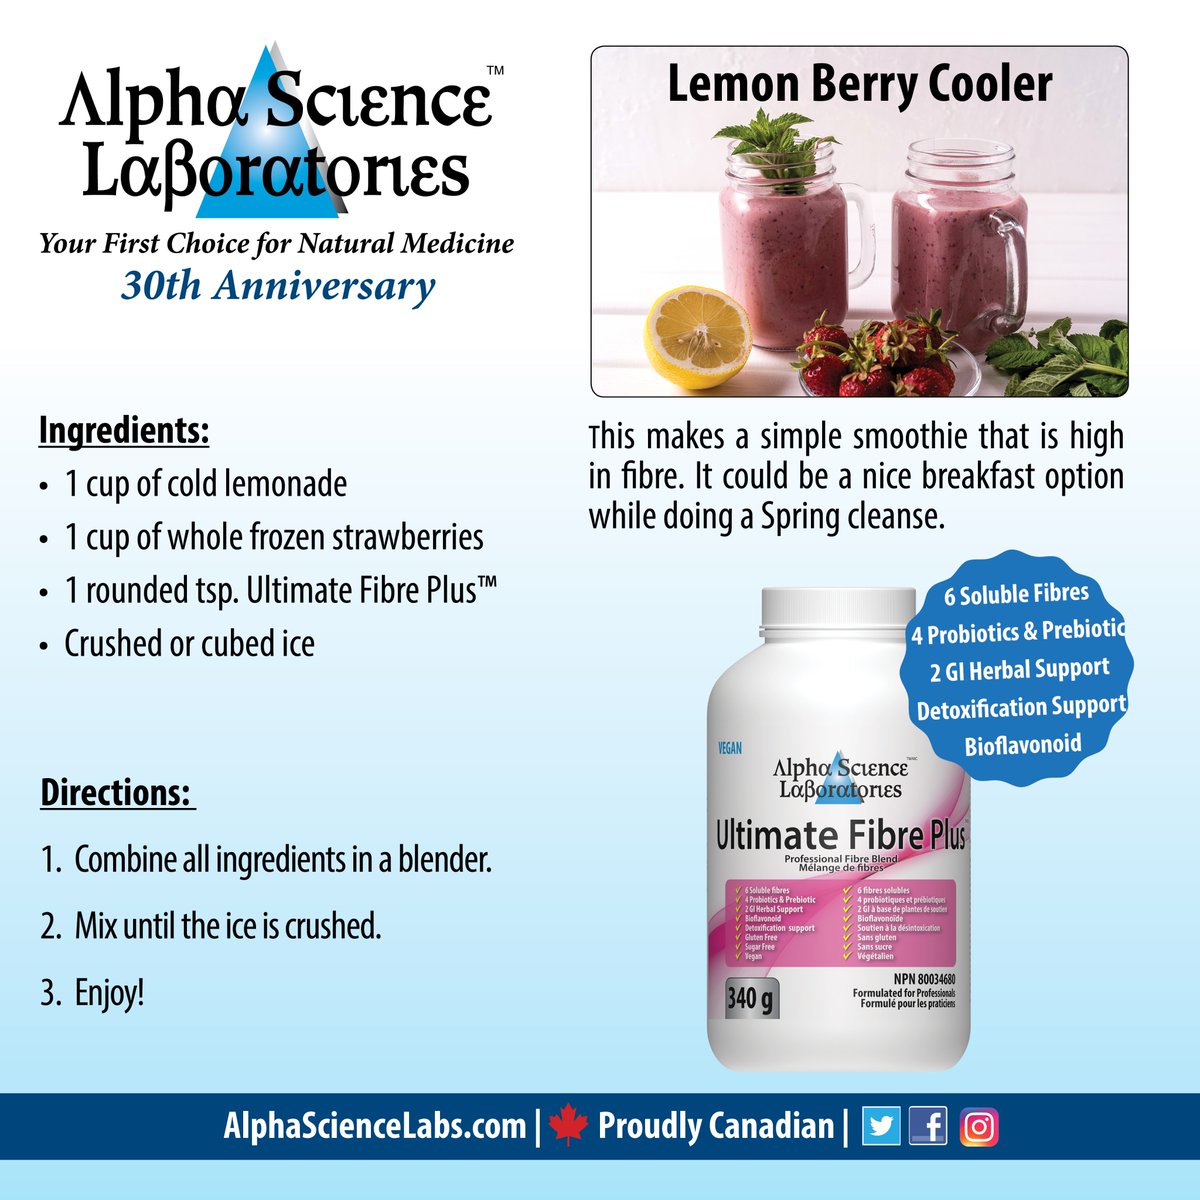 Doing a #Springdetox? Here is a simple #smoothierecipe that is high in #fibre to help promote elimination. This makes a nice #breakfast option while doing a #SpringCleanse.

#ultlimatefibreplus #alphasciencelabs #fibresupplement #probiotics #laxative #guthealth #breakfastsmoothie